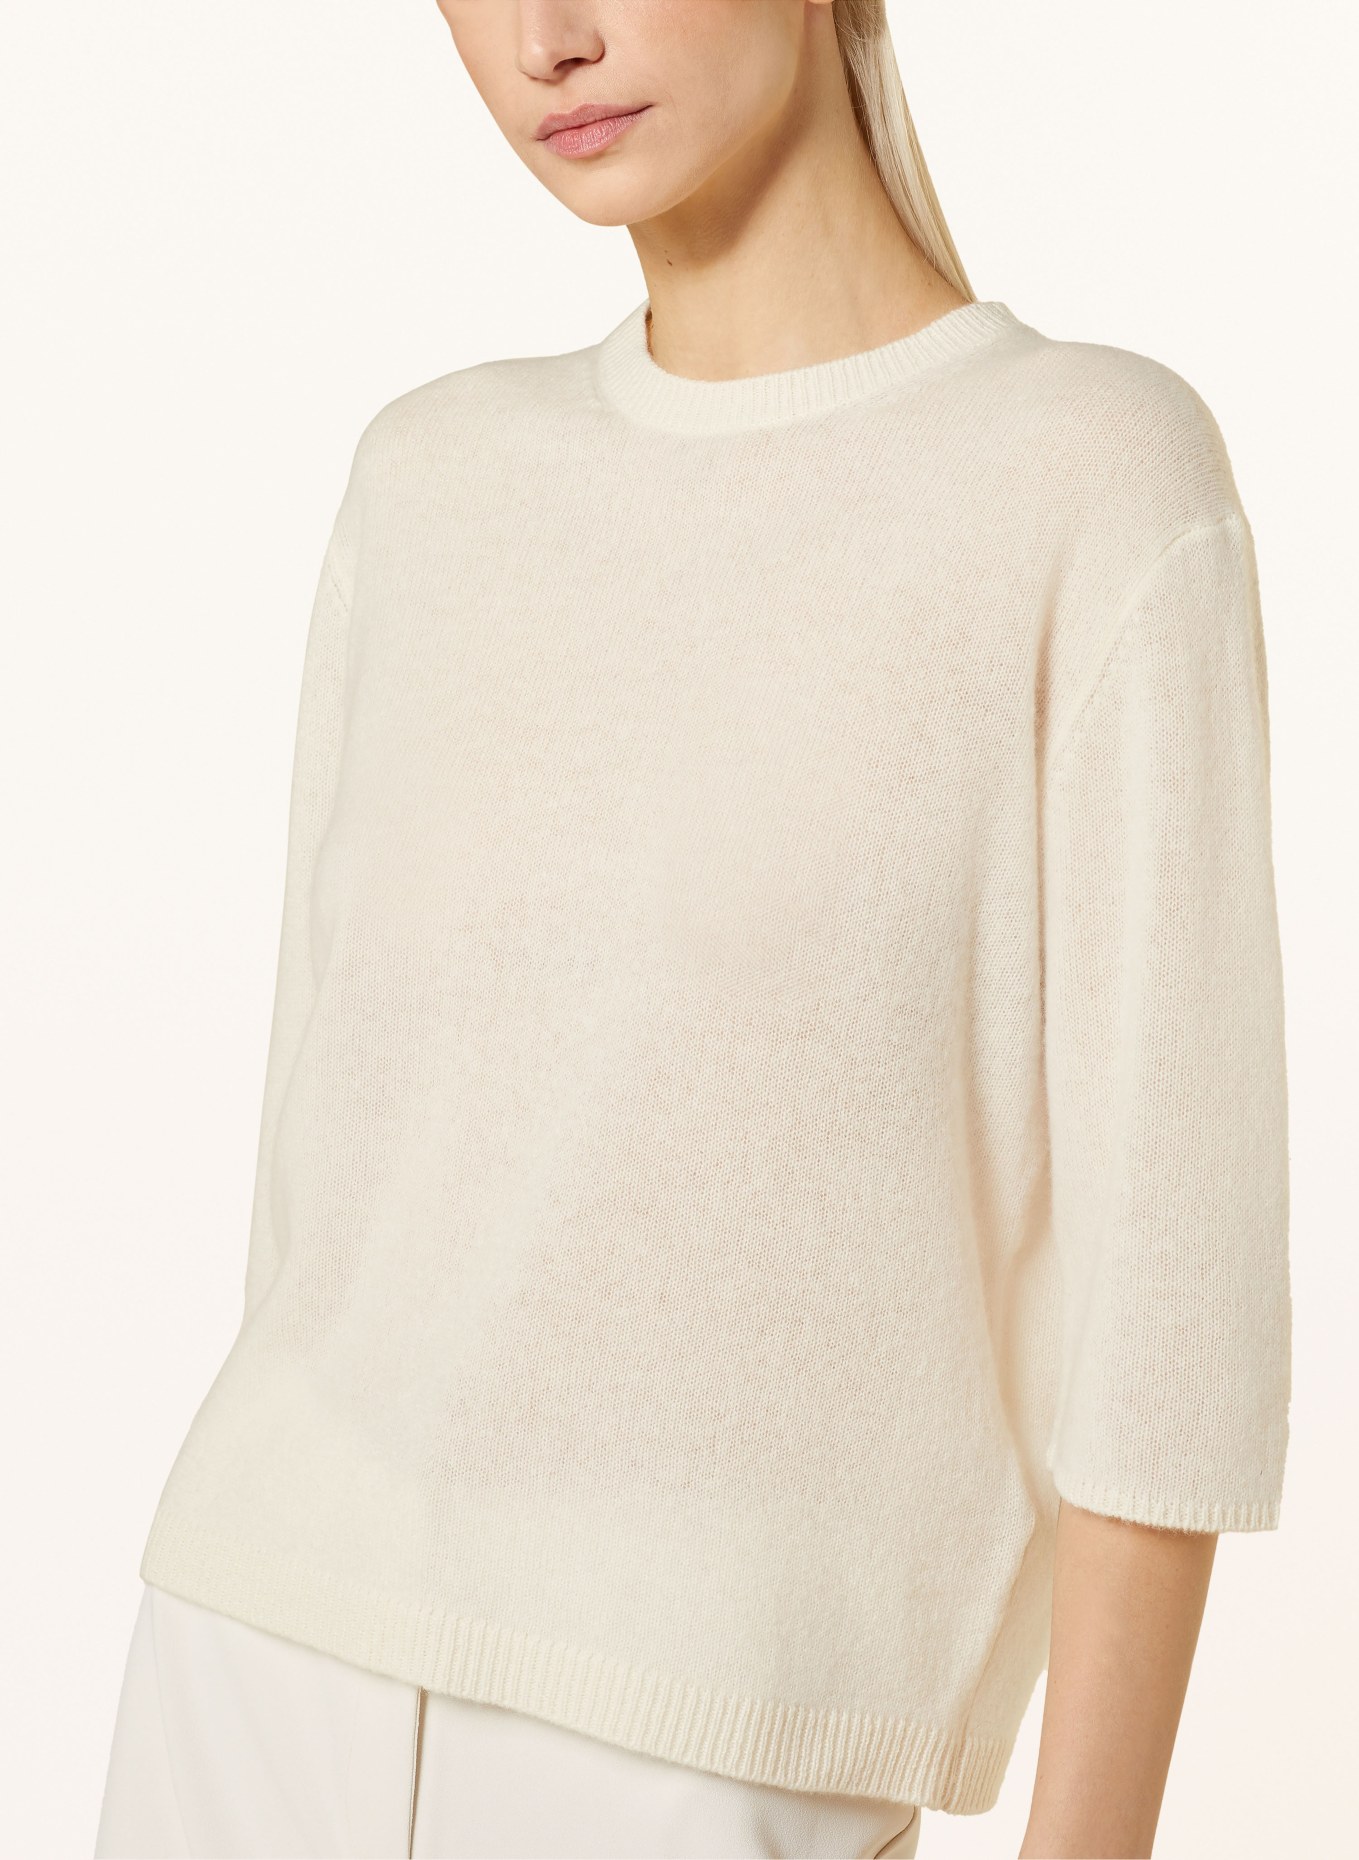 JOOP! Cashmere sweater with 3/4 sleeves, Color: ECRU (Image 4)